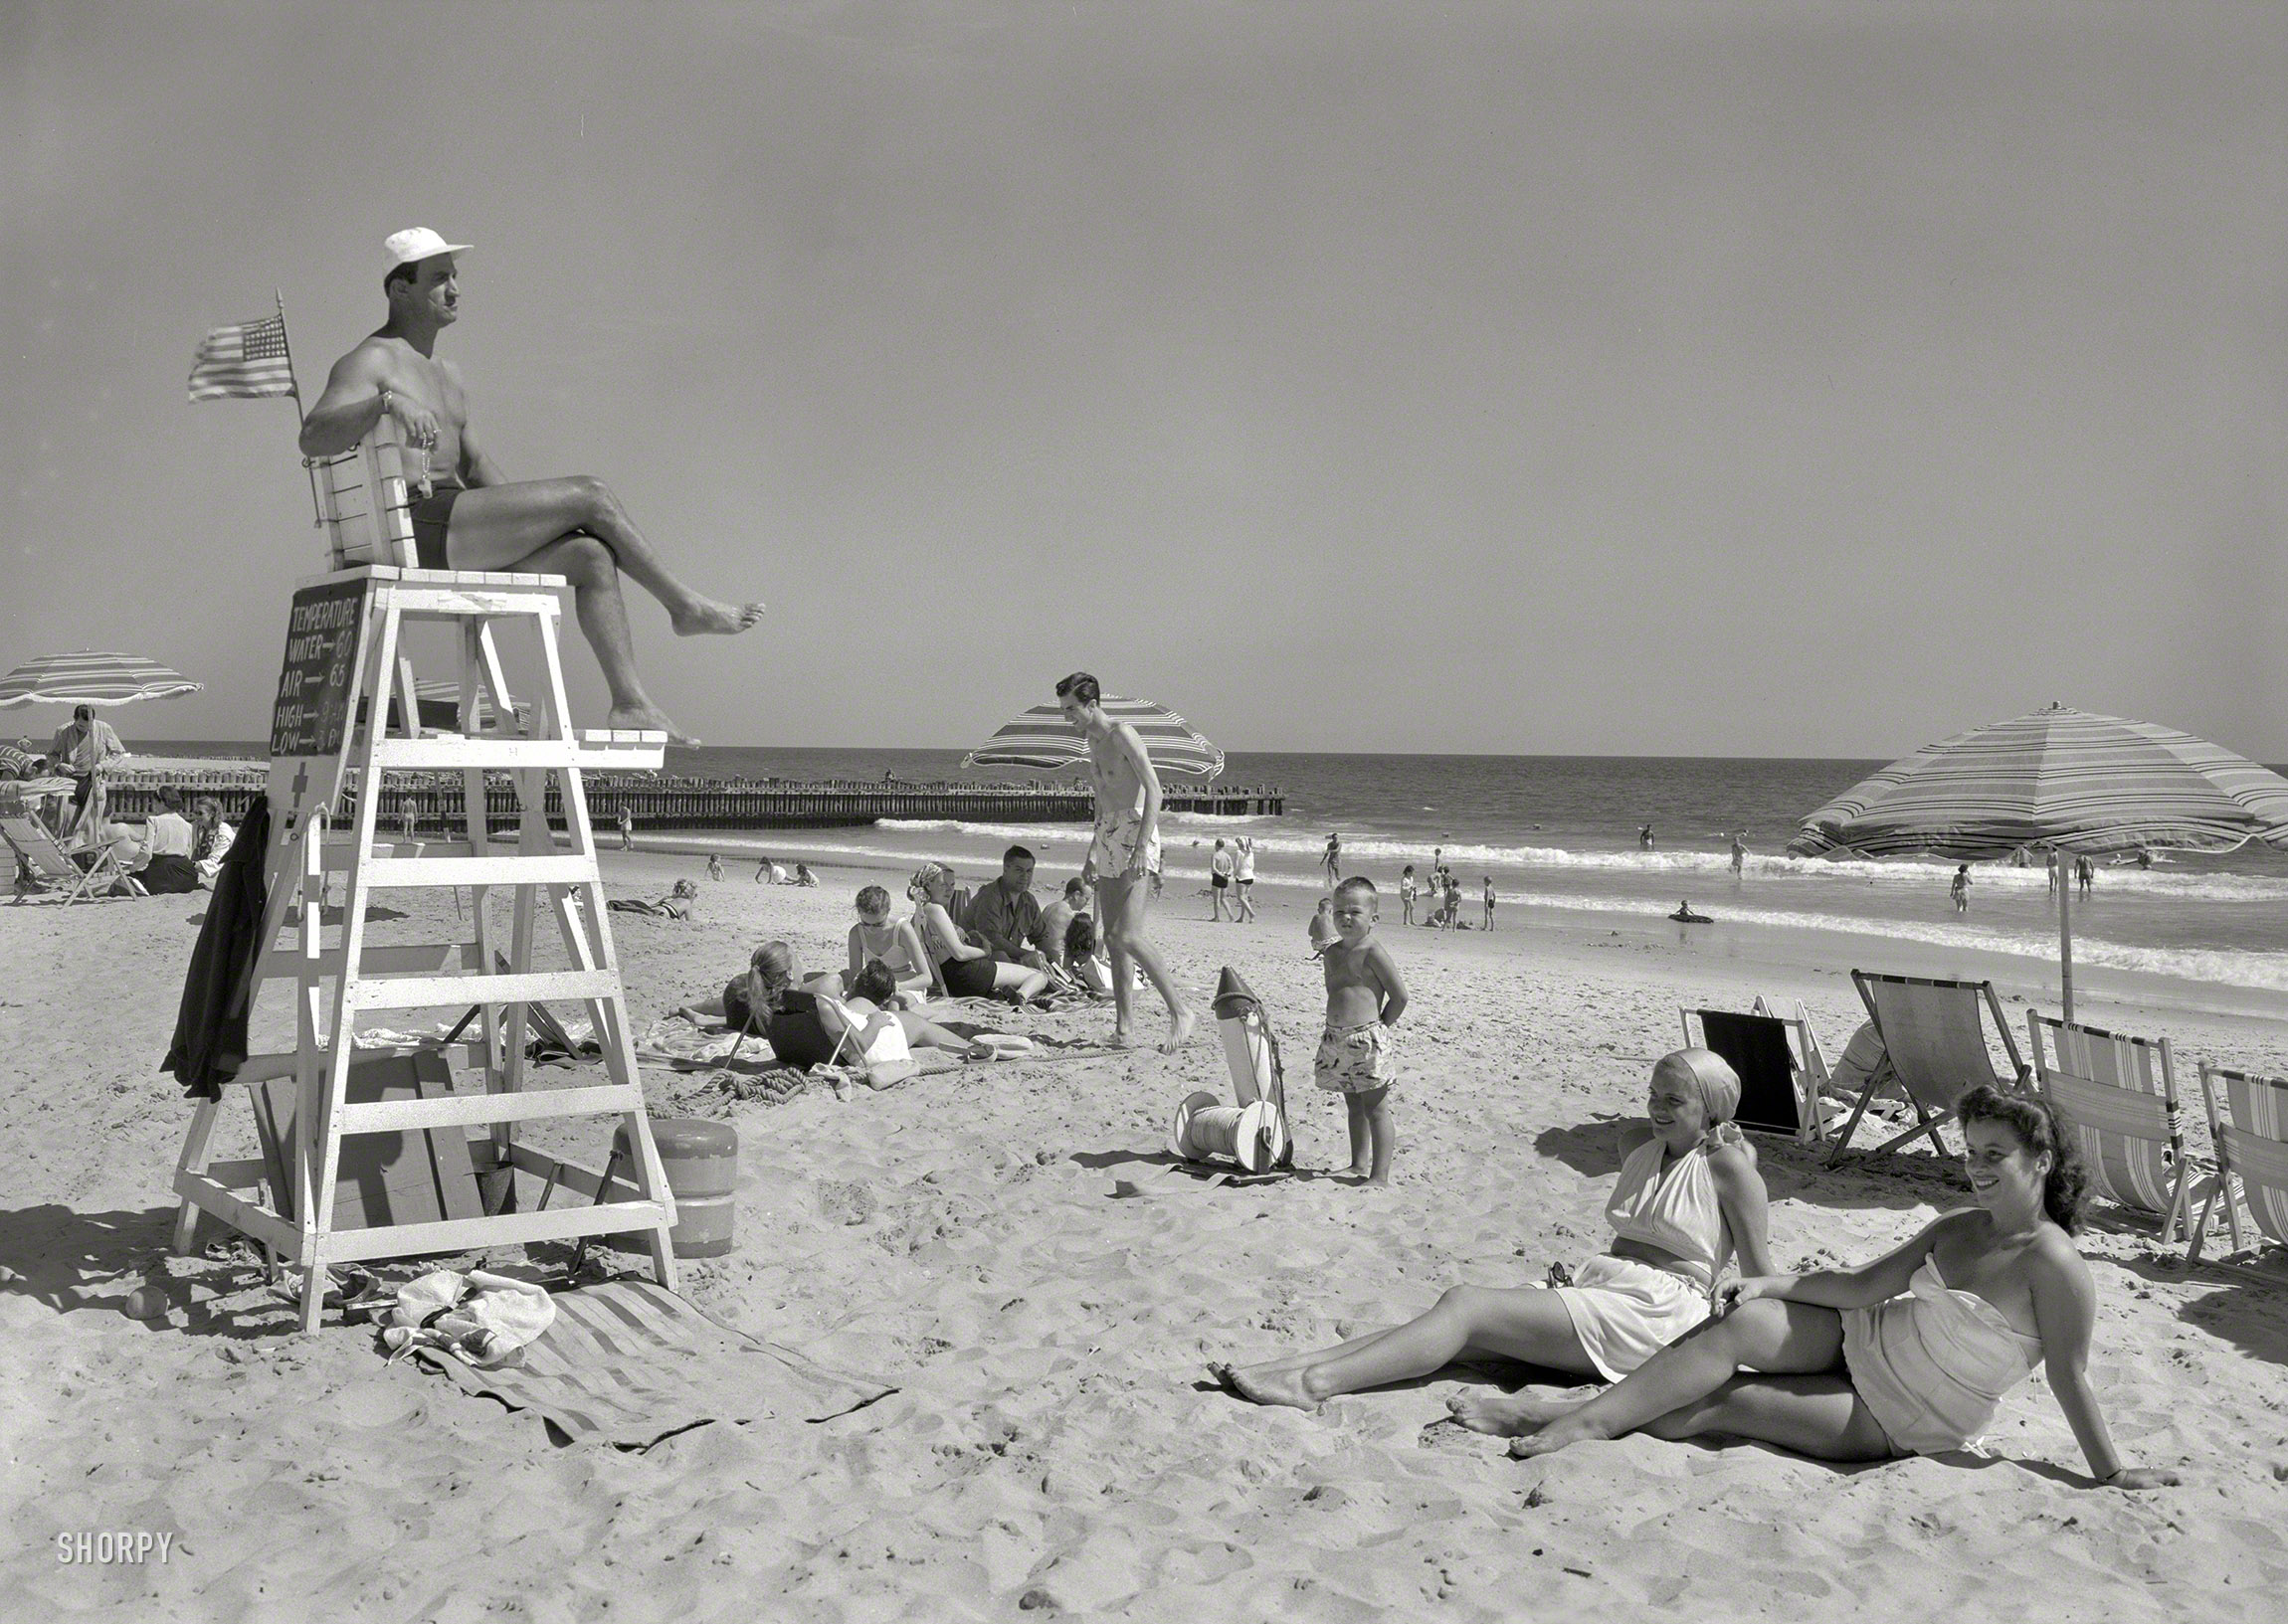 August 1, 1947. "Surf Club, Atlantic Beach, Long Island, New York. Beach scene III." Ever alert for signs of distress, the lifeguard must have a keen sense of peripheral vision. Gottscho-Schleisner photo. View full size.